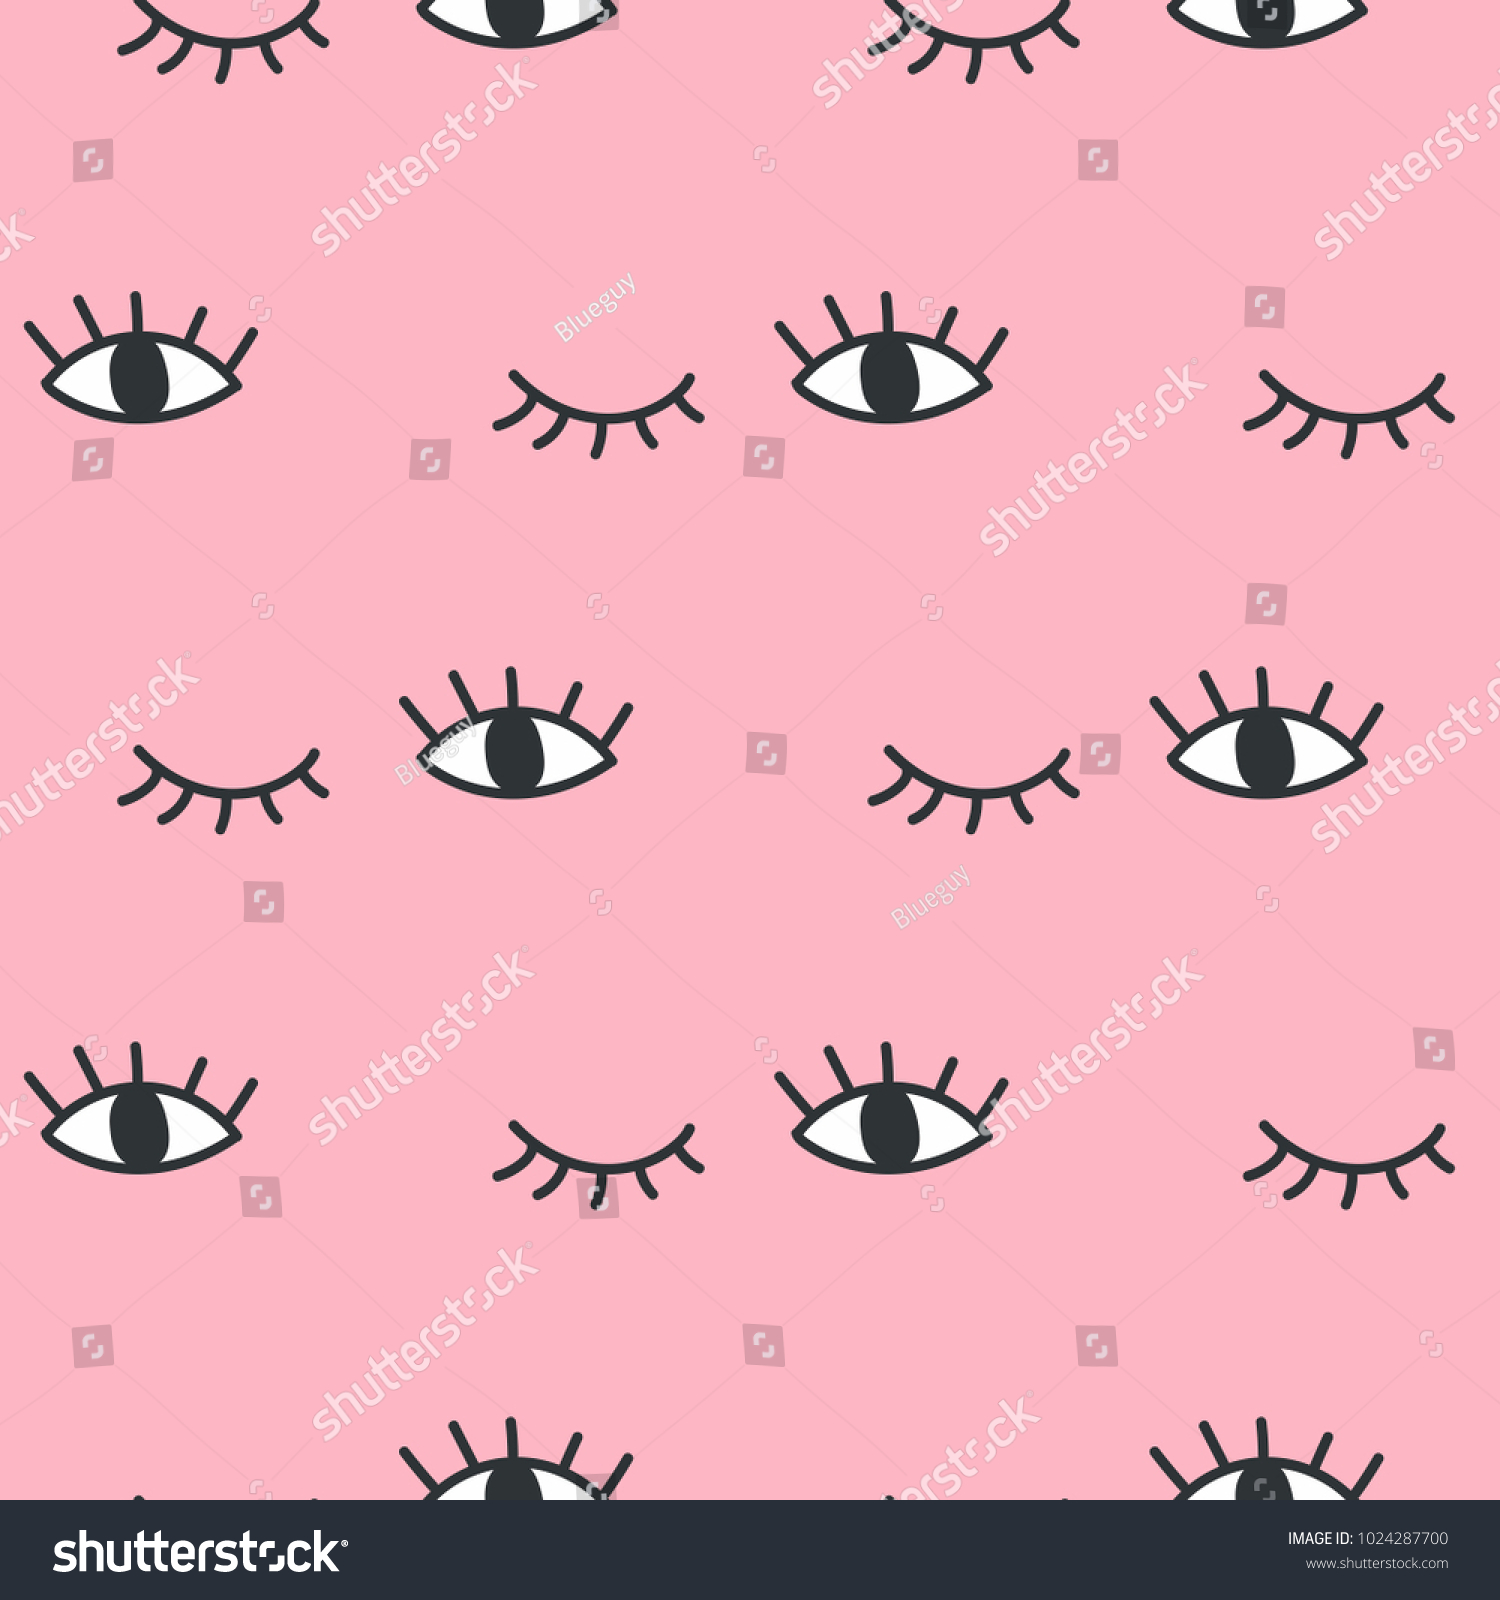 SVG of Hand drawn open and winking eyes doodles seamless pattern. svg